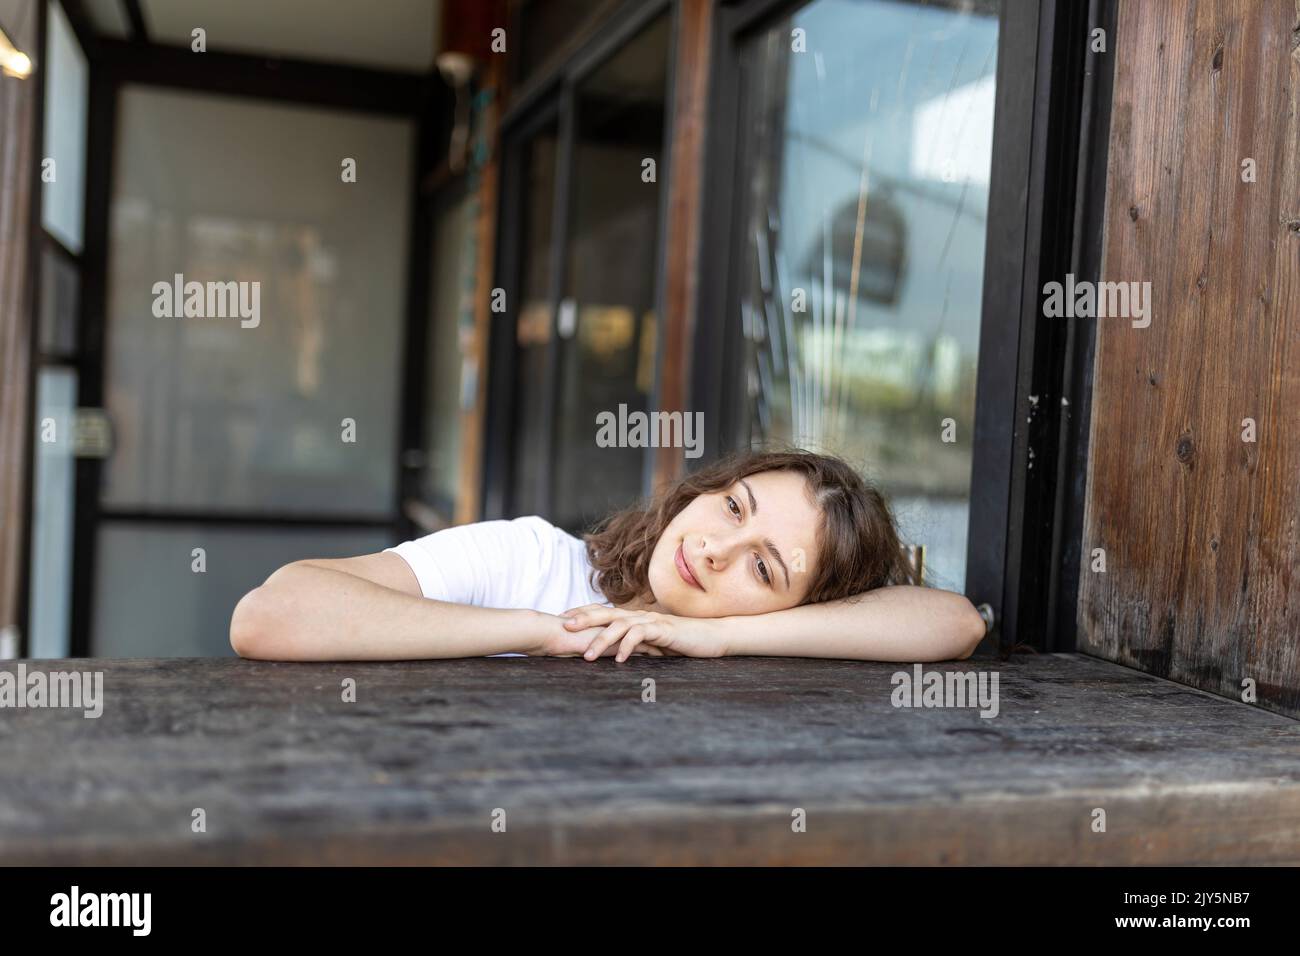 A smiling brunette girl in a white T-shirt, blue jeans sits at a wooden counter in a cafe, resting her chin in her hands. Vertical frame. Stock Photo